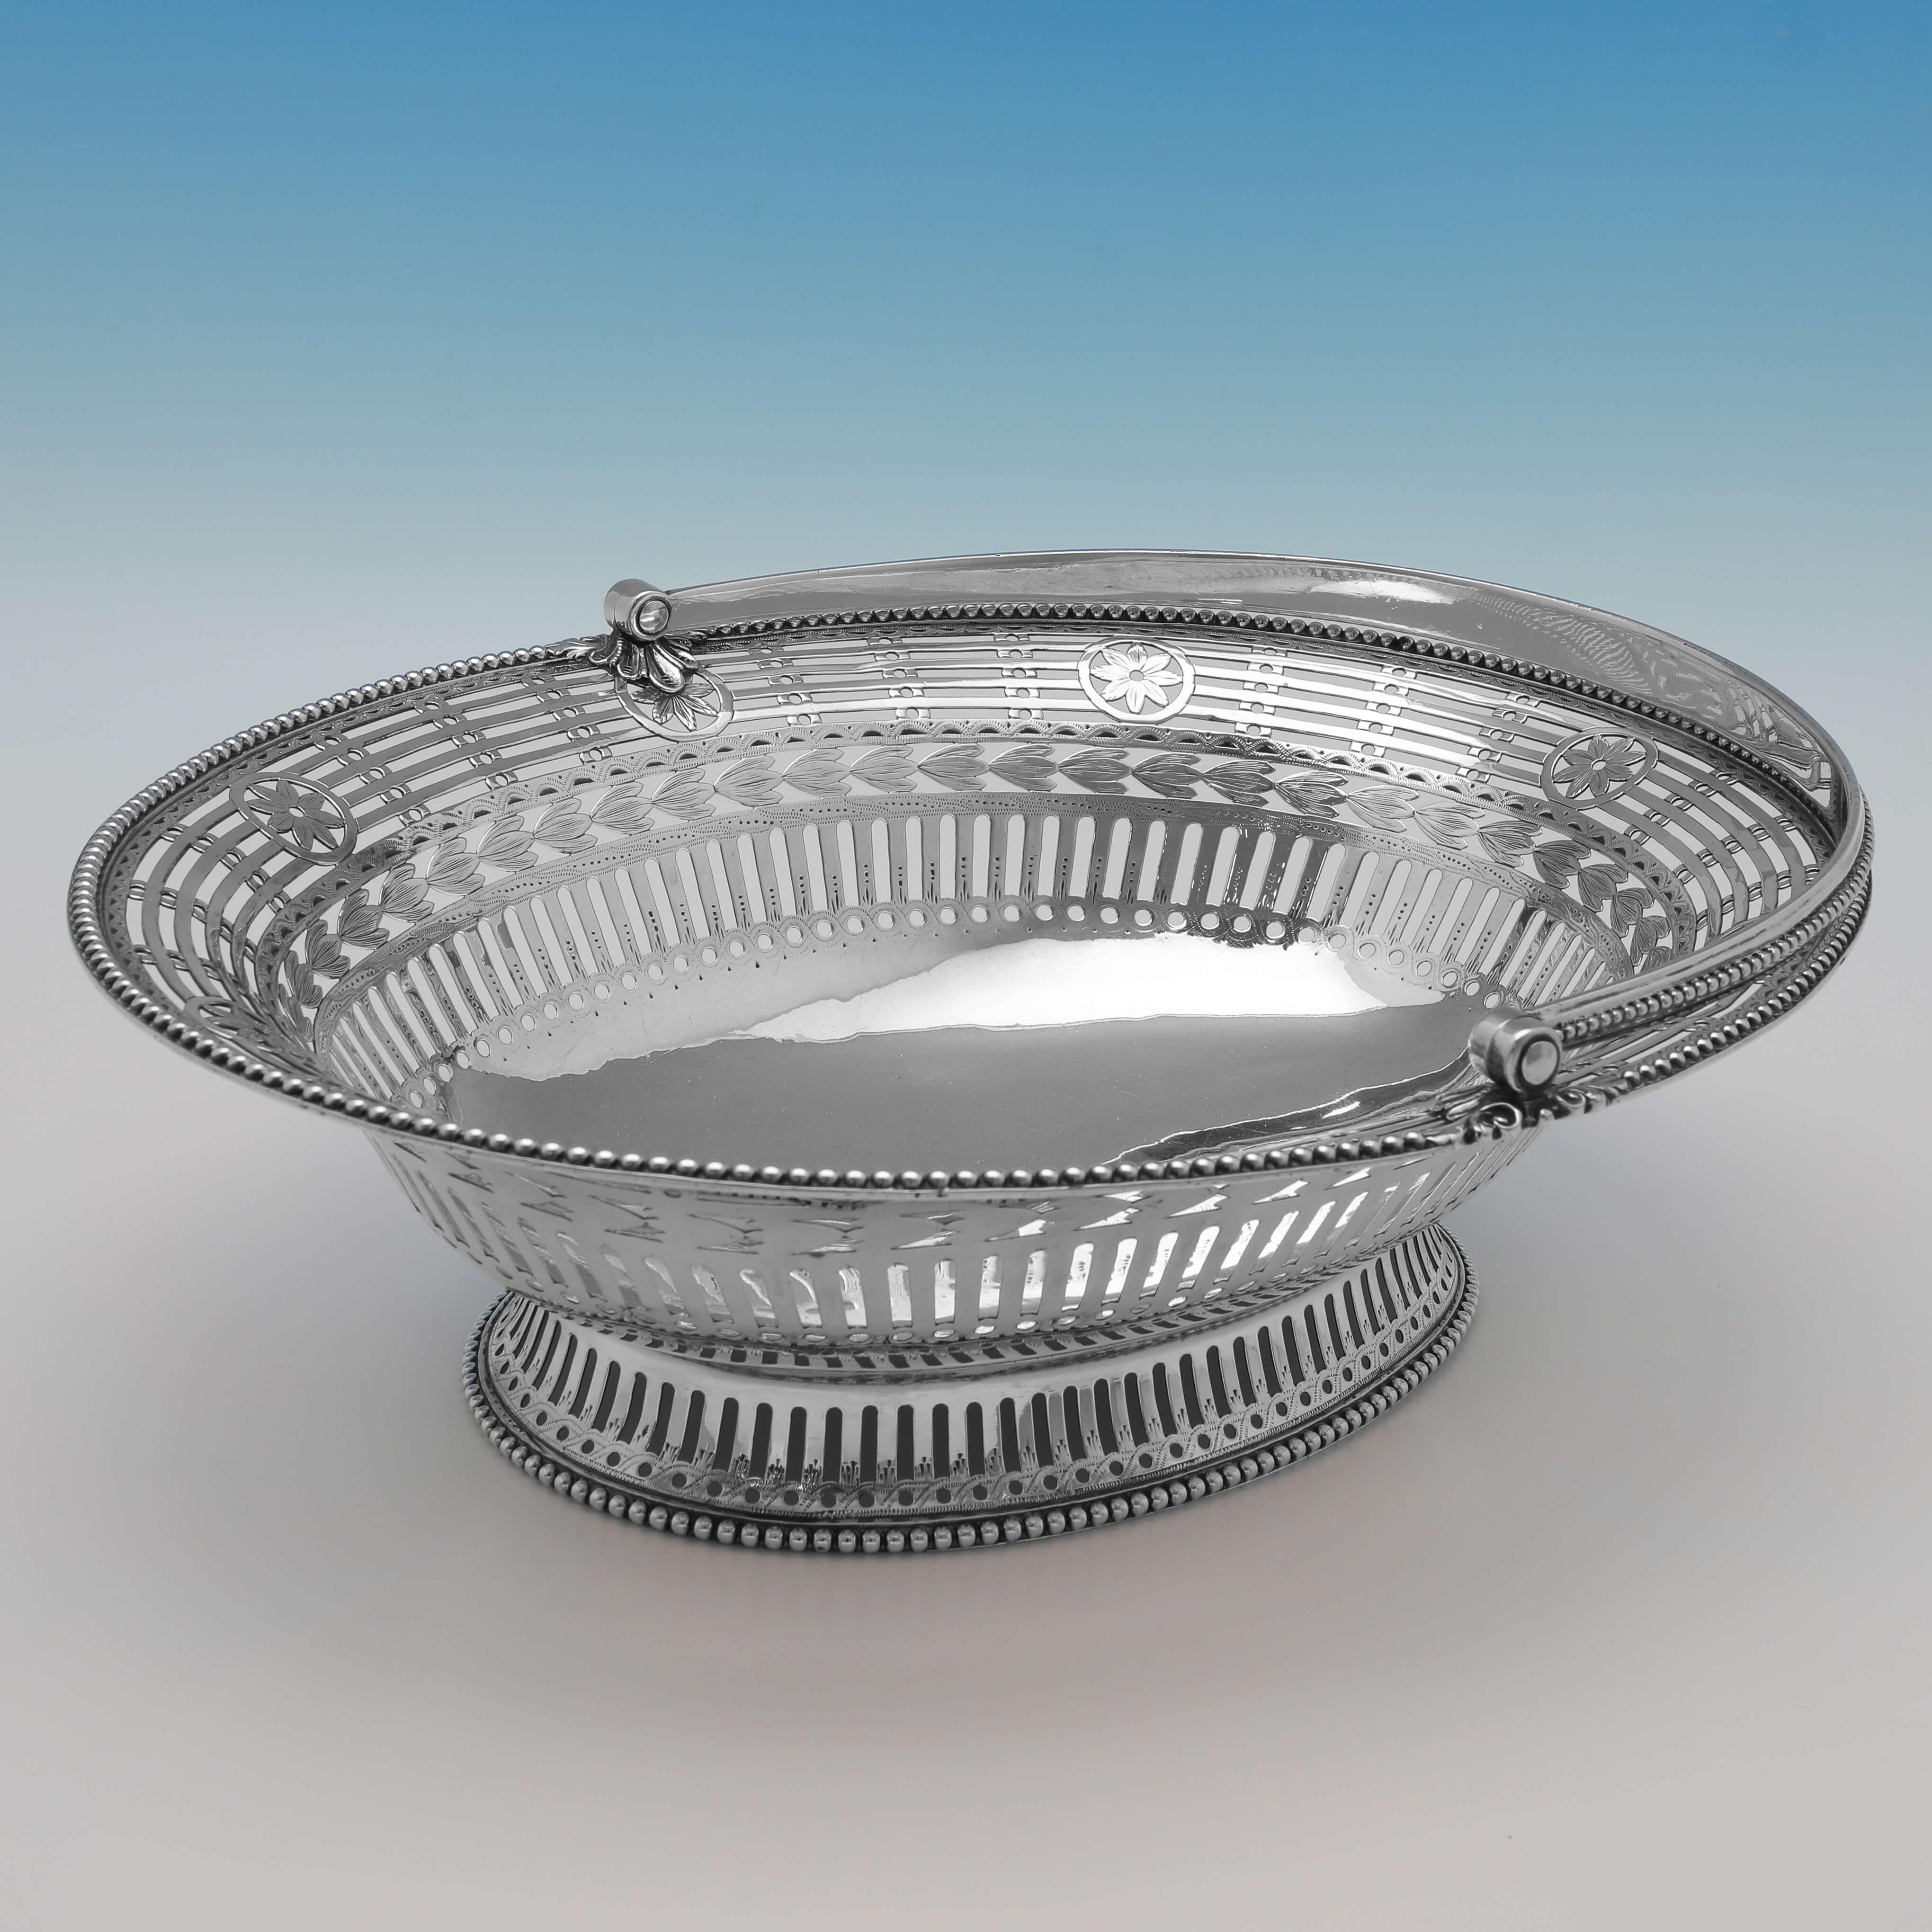 English Stunning Neoclassical Antique Sterling Silver Centrepiece Basket, London, 1778 For Sale